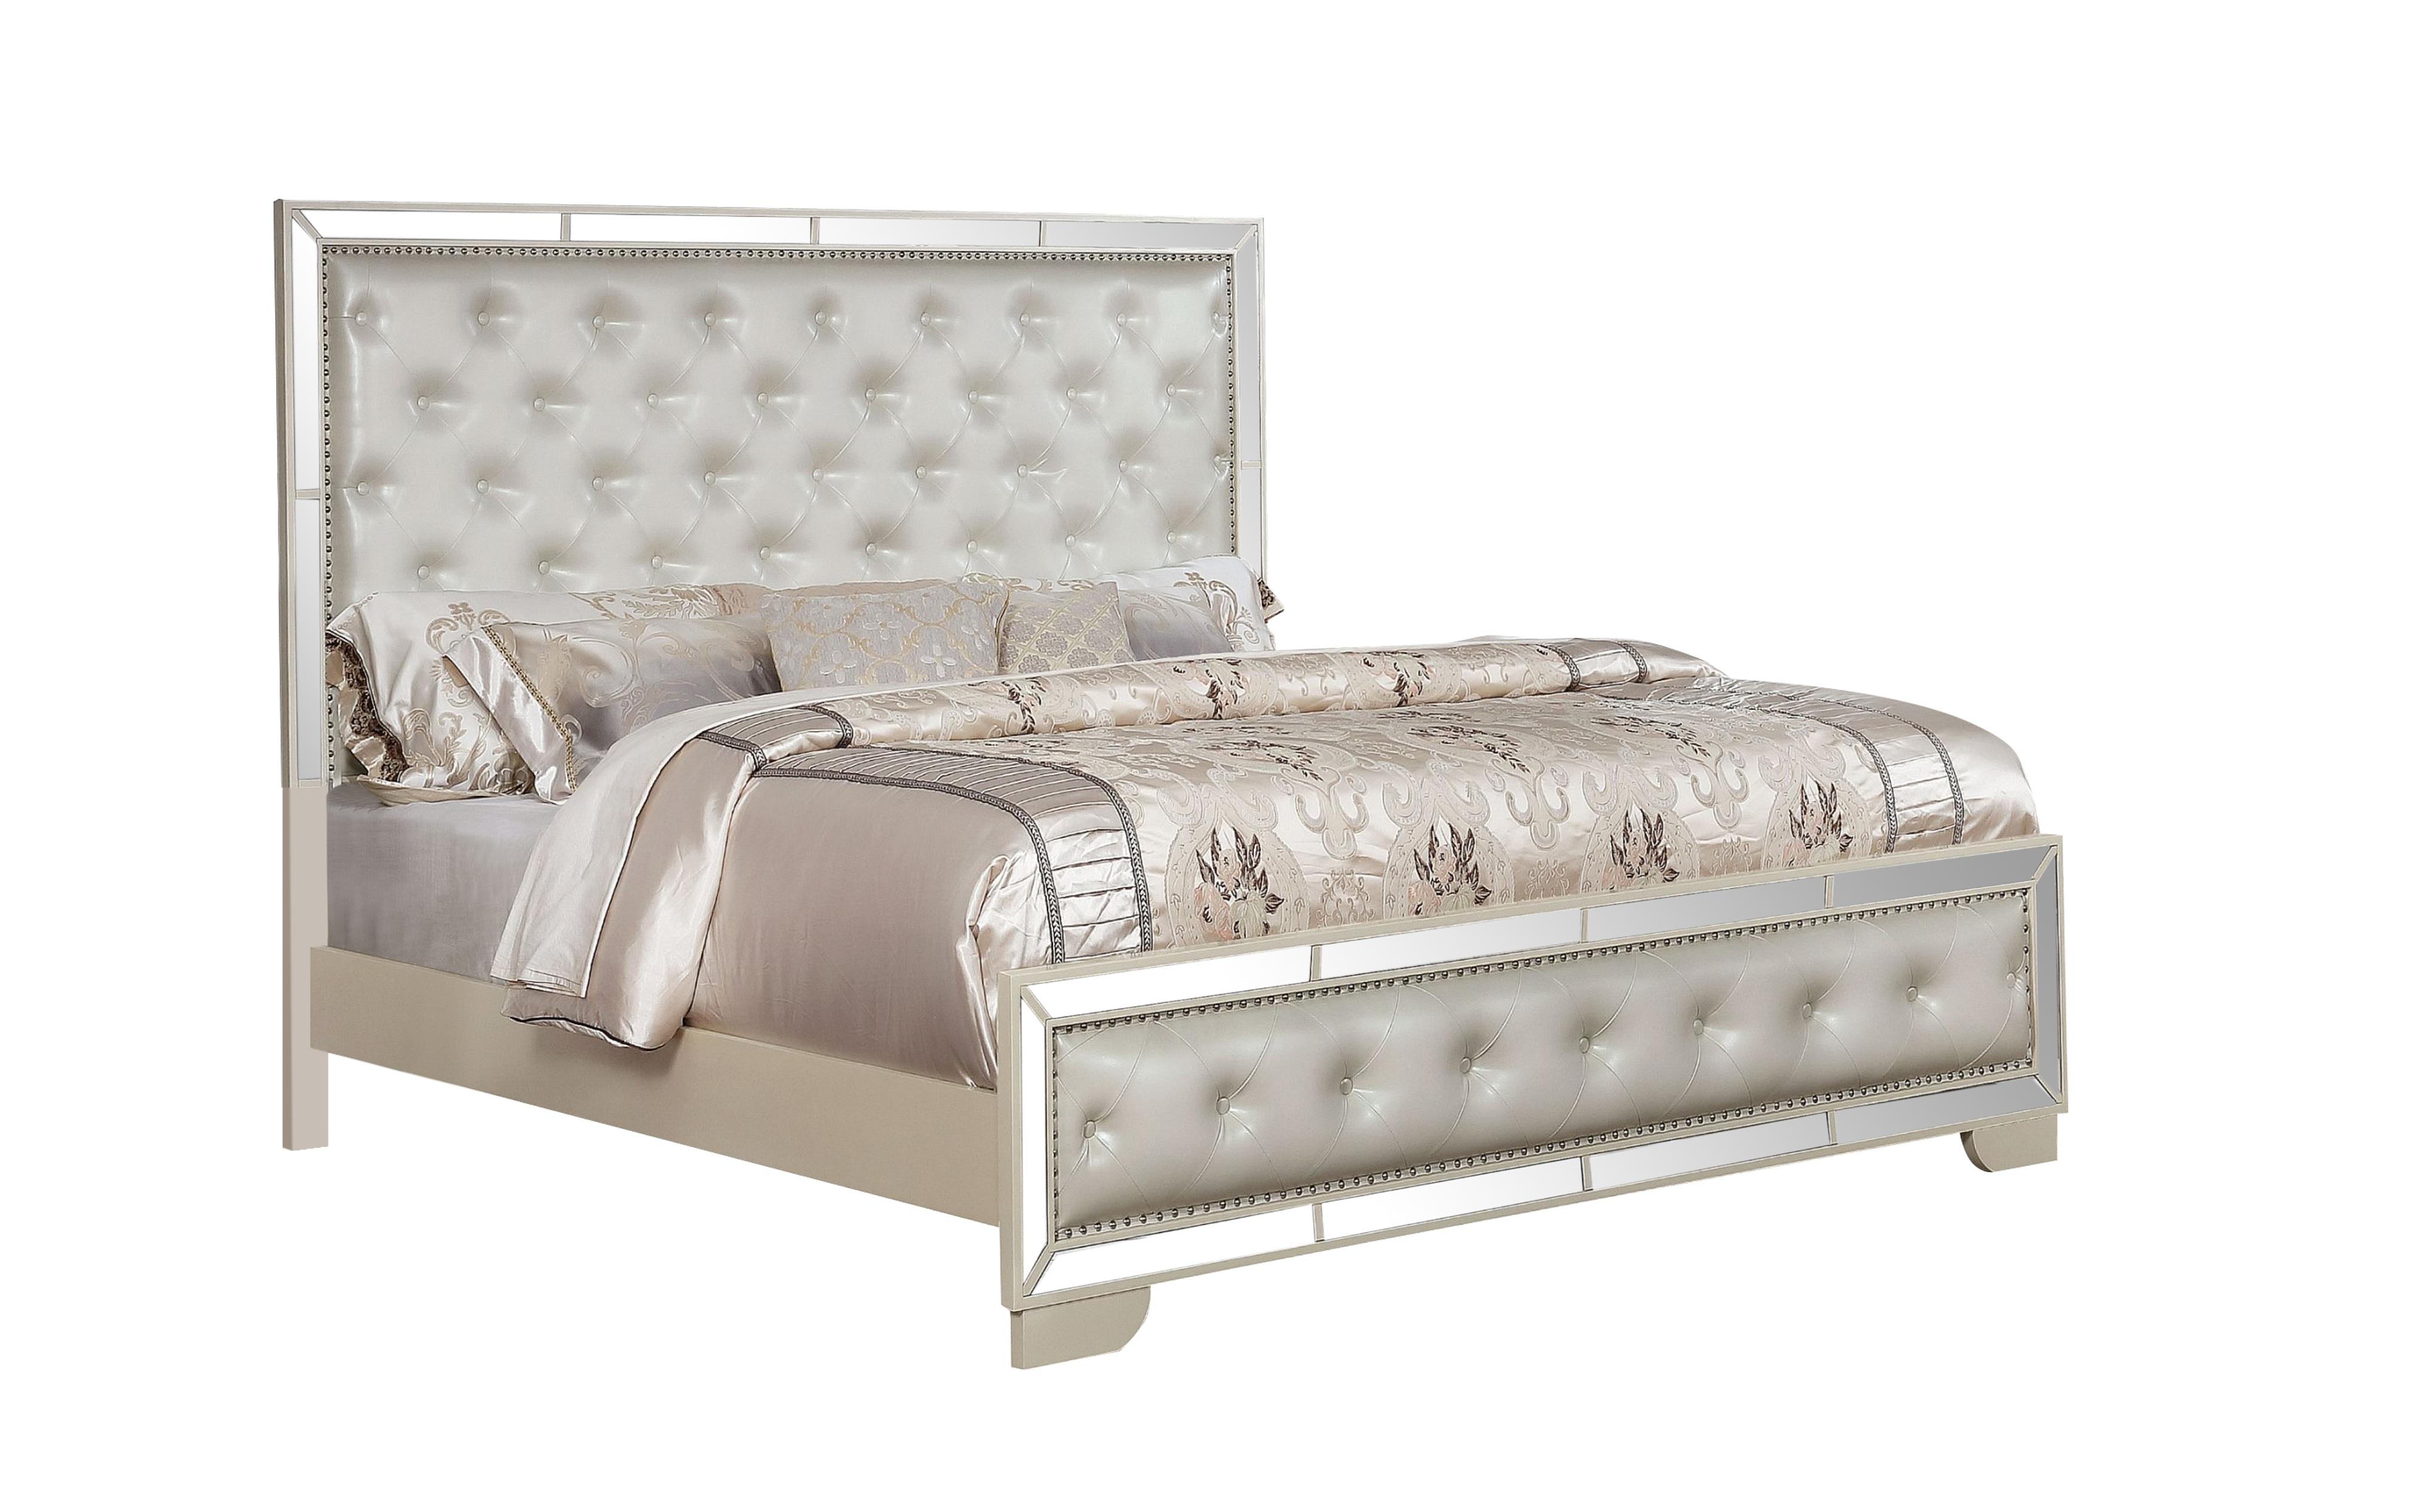 

    
Glam Beige Mirrored Inlay Tufted King Bed MADISON Galaxy Home Modern
